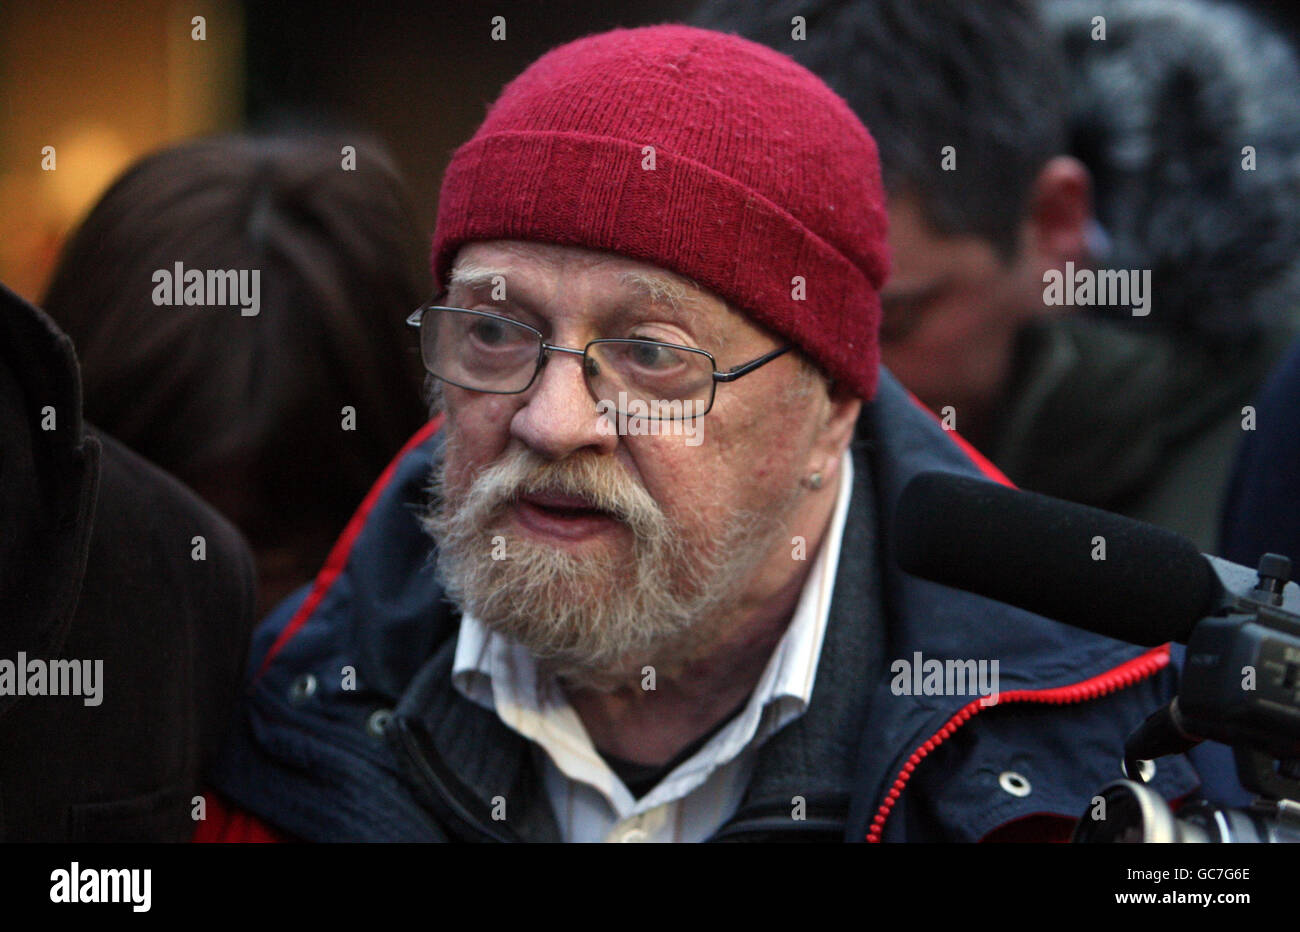 Ian McNicol, the father of murdered teenager Dinah McNicol, outside of Chelmsford Crown Court, Chelmsford, Essex. Stock Photo